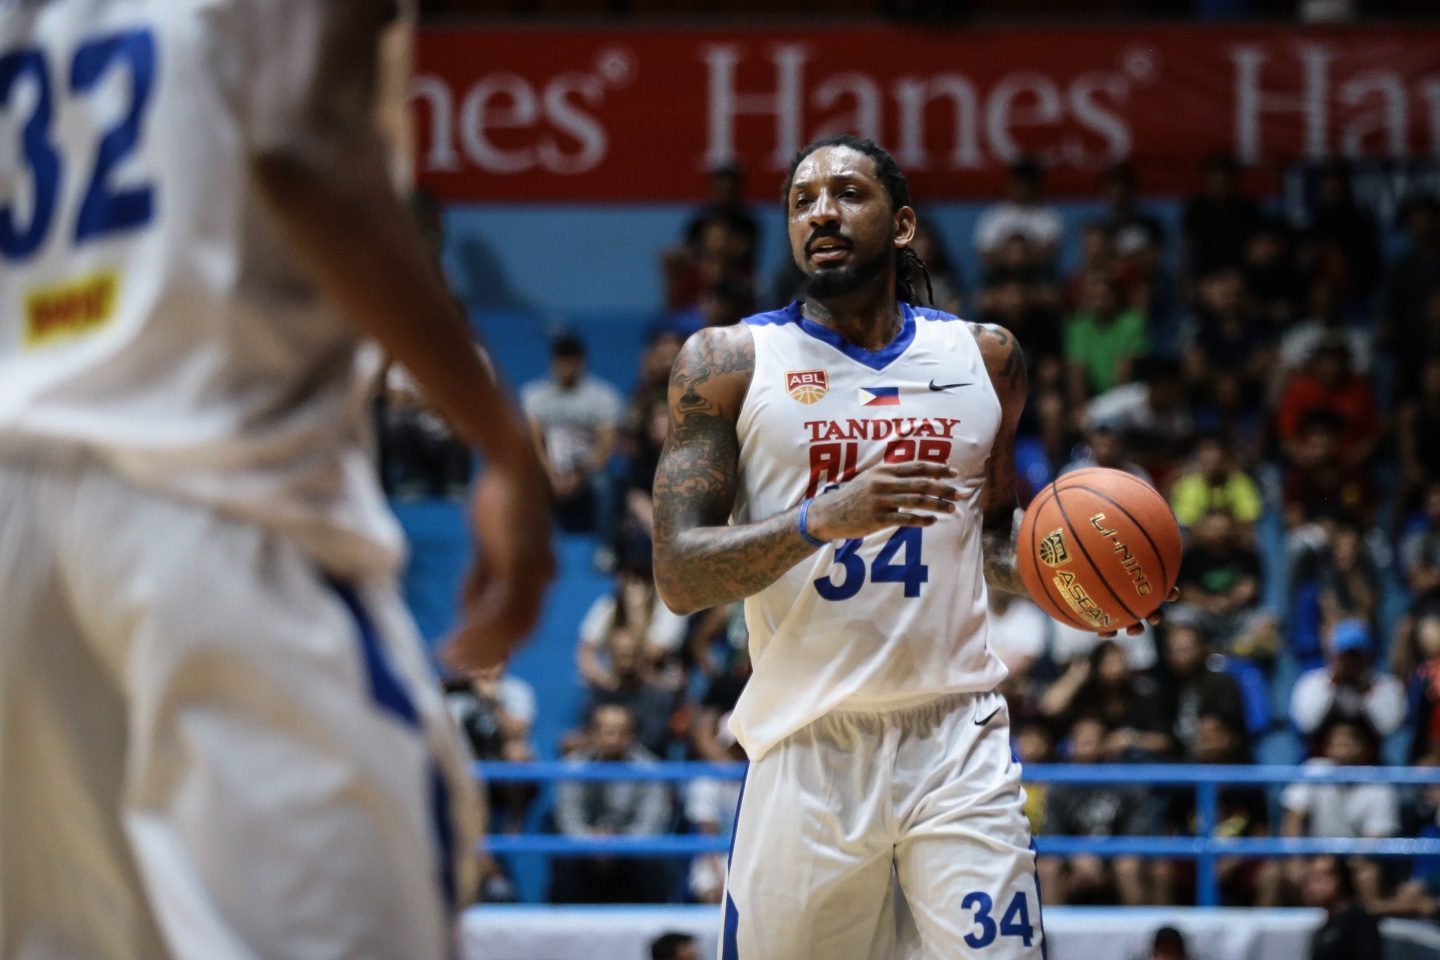 Balkman, Brownlee power Alab Pilipinas to 3rd straight victory